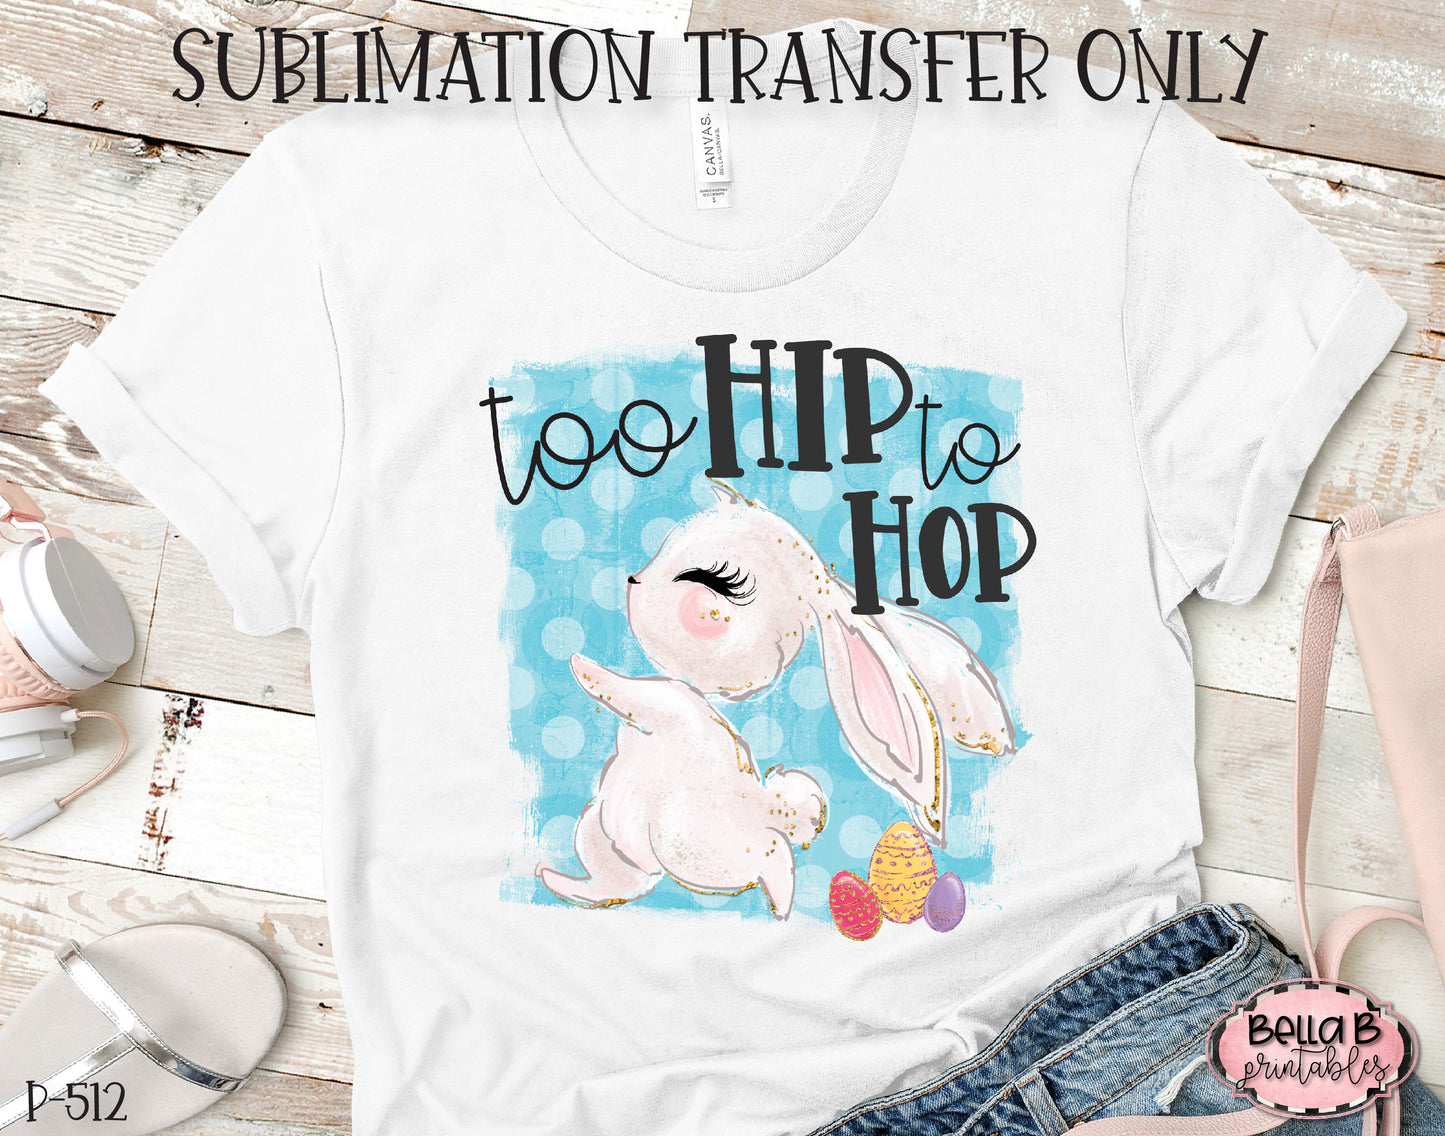 Easter Sublimation Transfer, Too Hip To Hop, Ready To Press, Heat Press Transfer, Sublimation Print